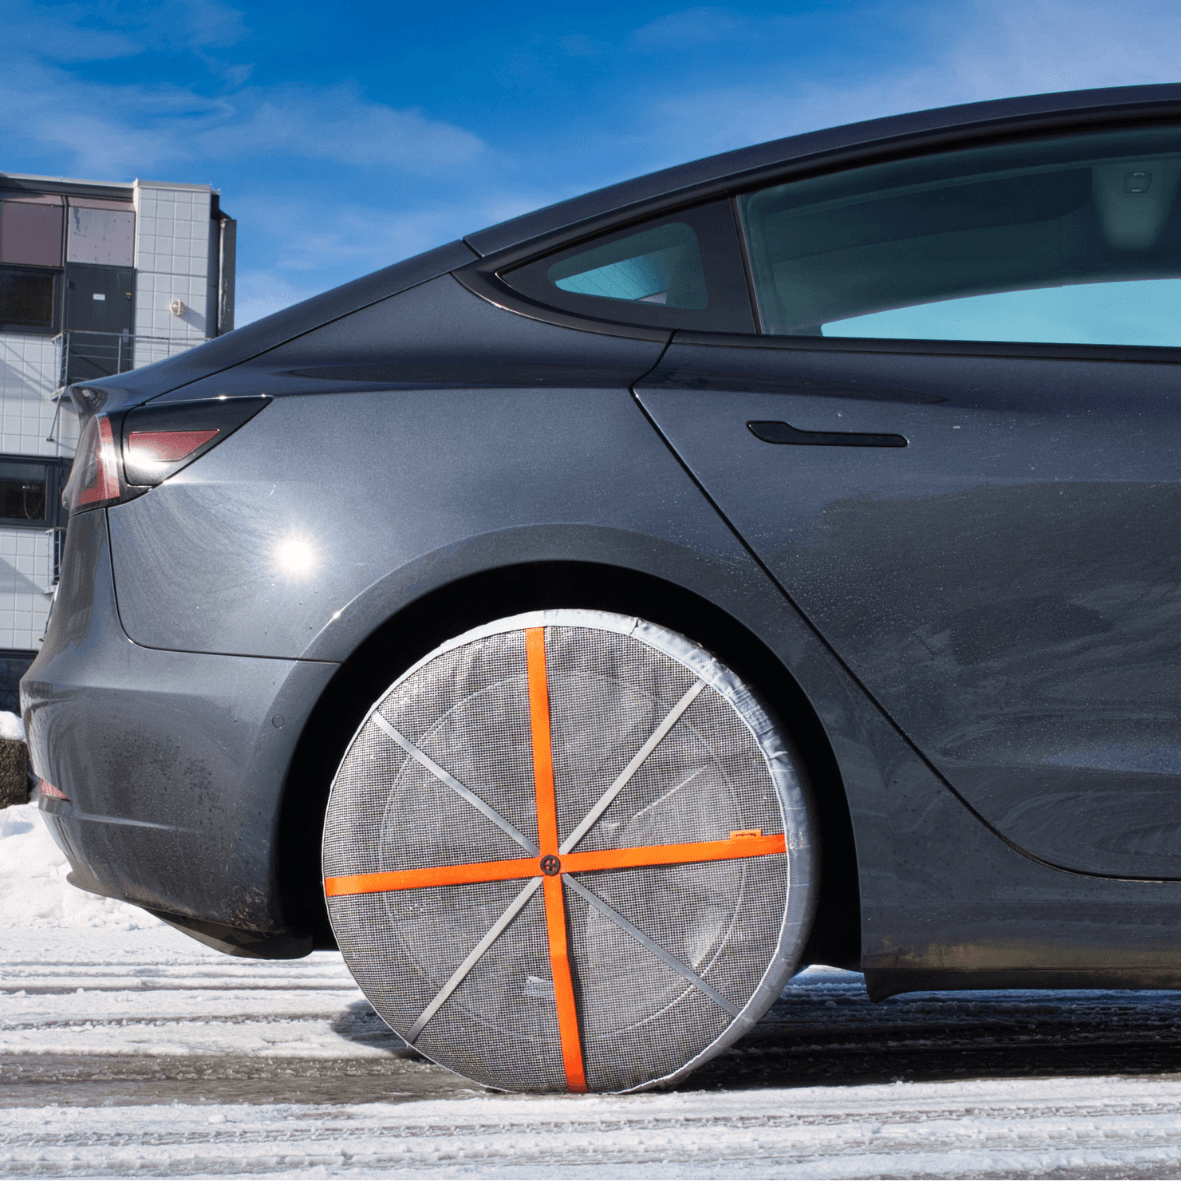 AutoSock textile tire chains installed on rear wheels of a Tesla electrical car